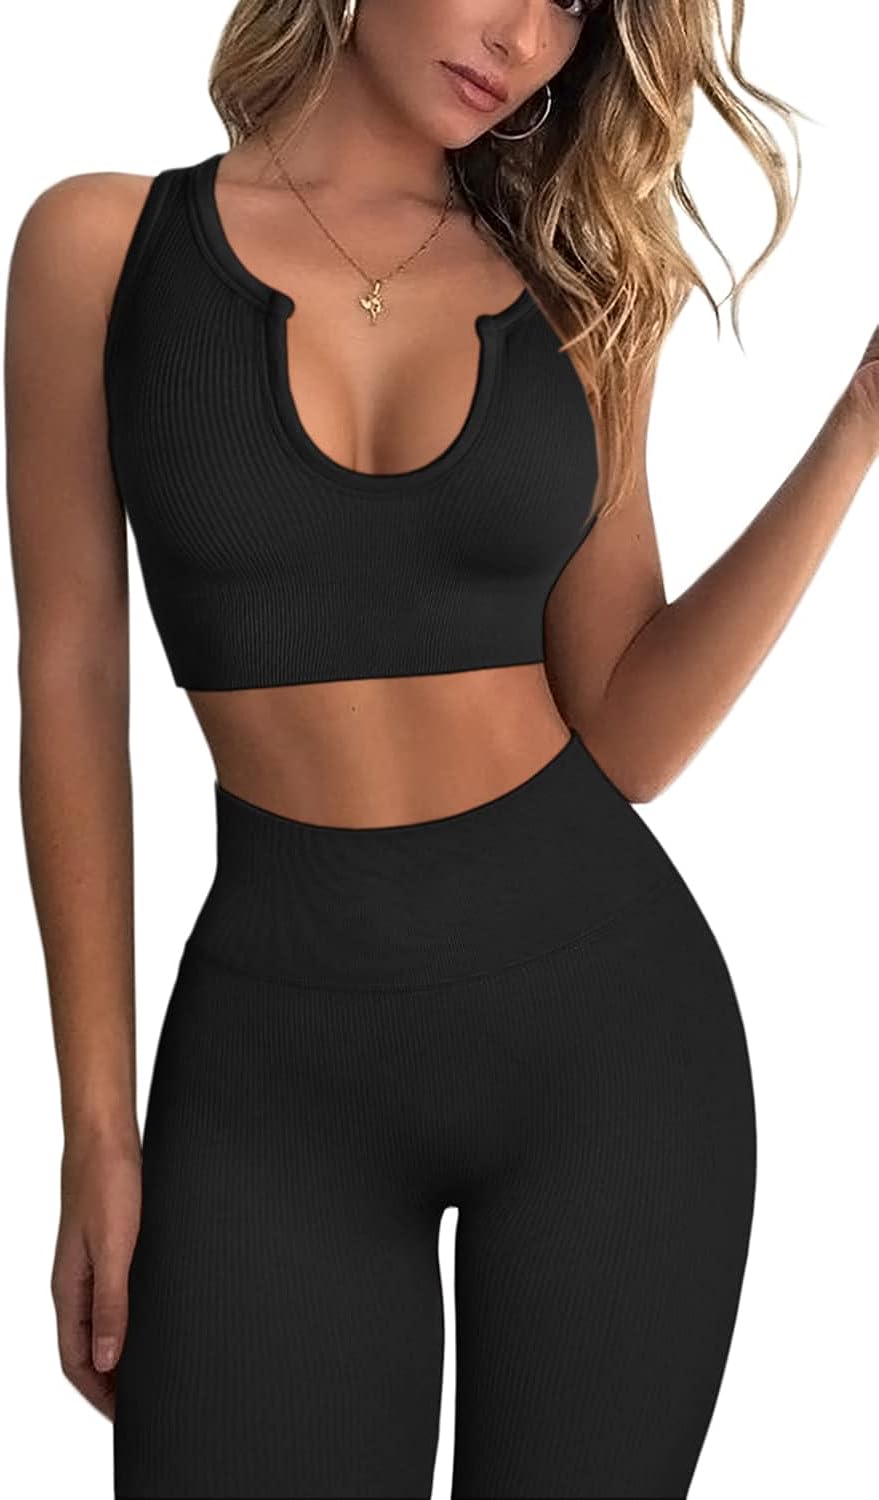 QINSEN Workout Outfits Review